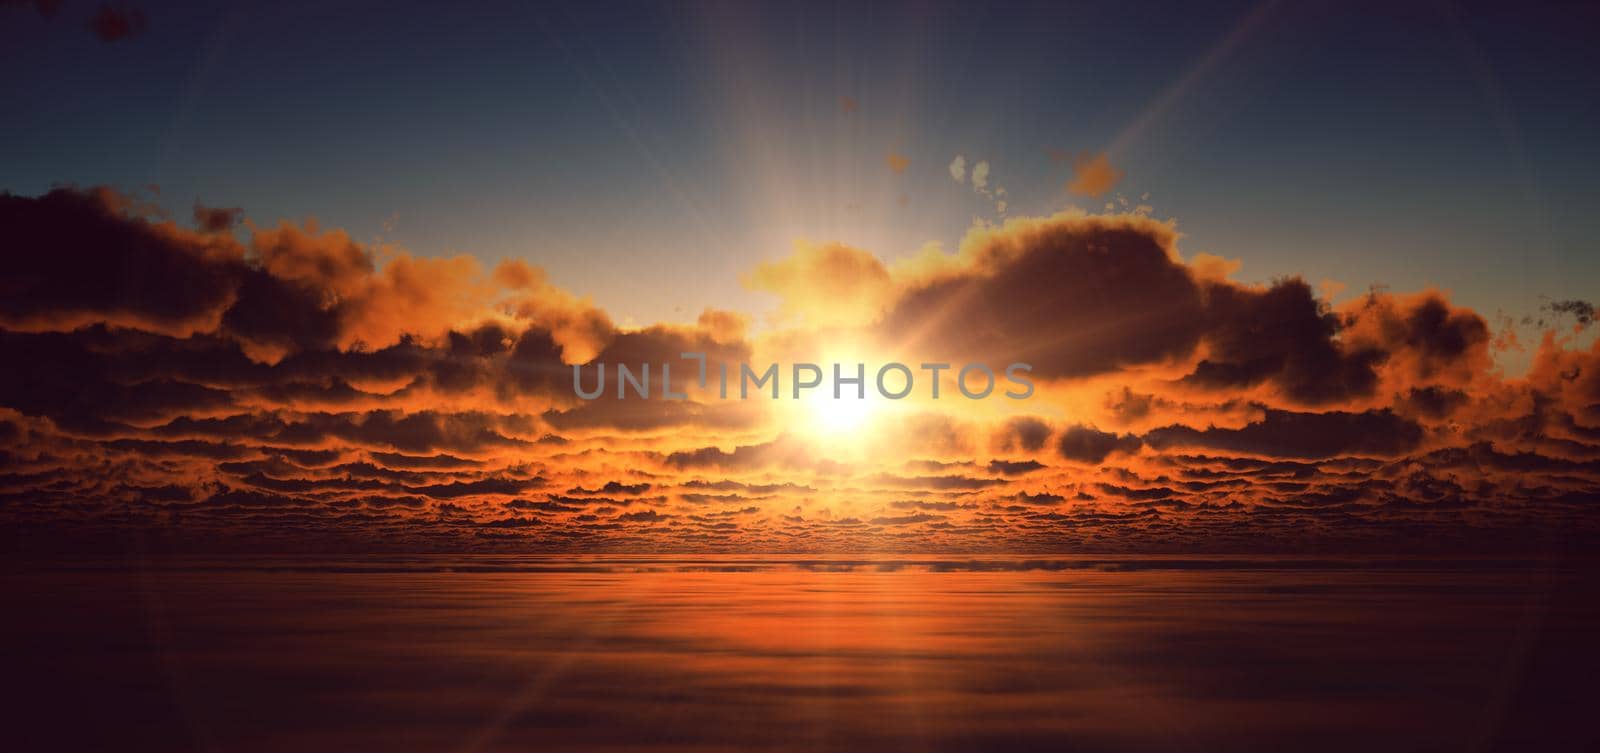 fly above clouds sunset by alex_nako